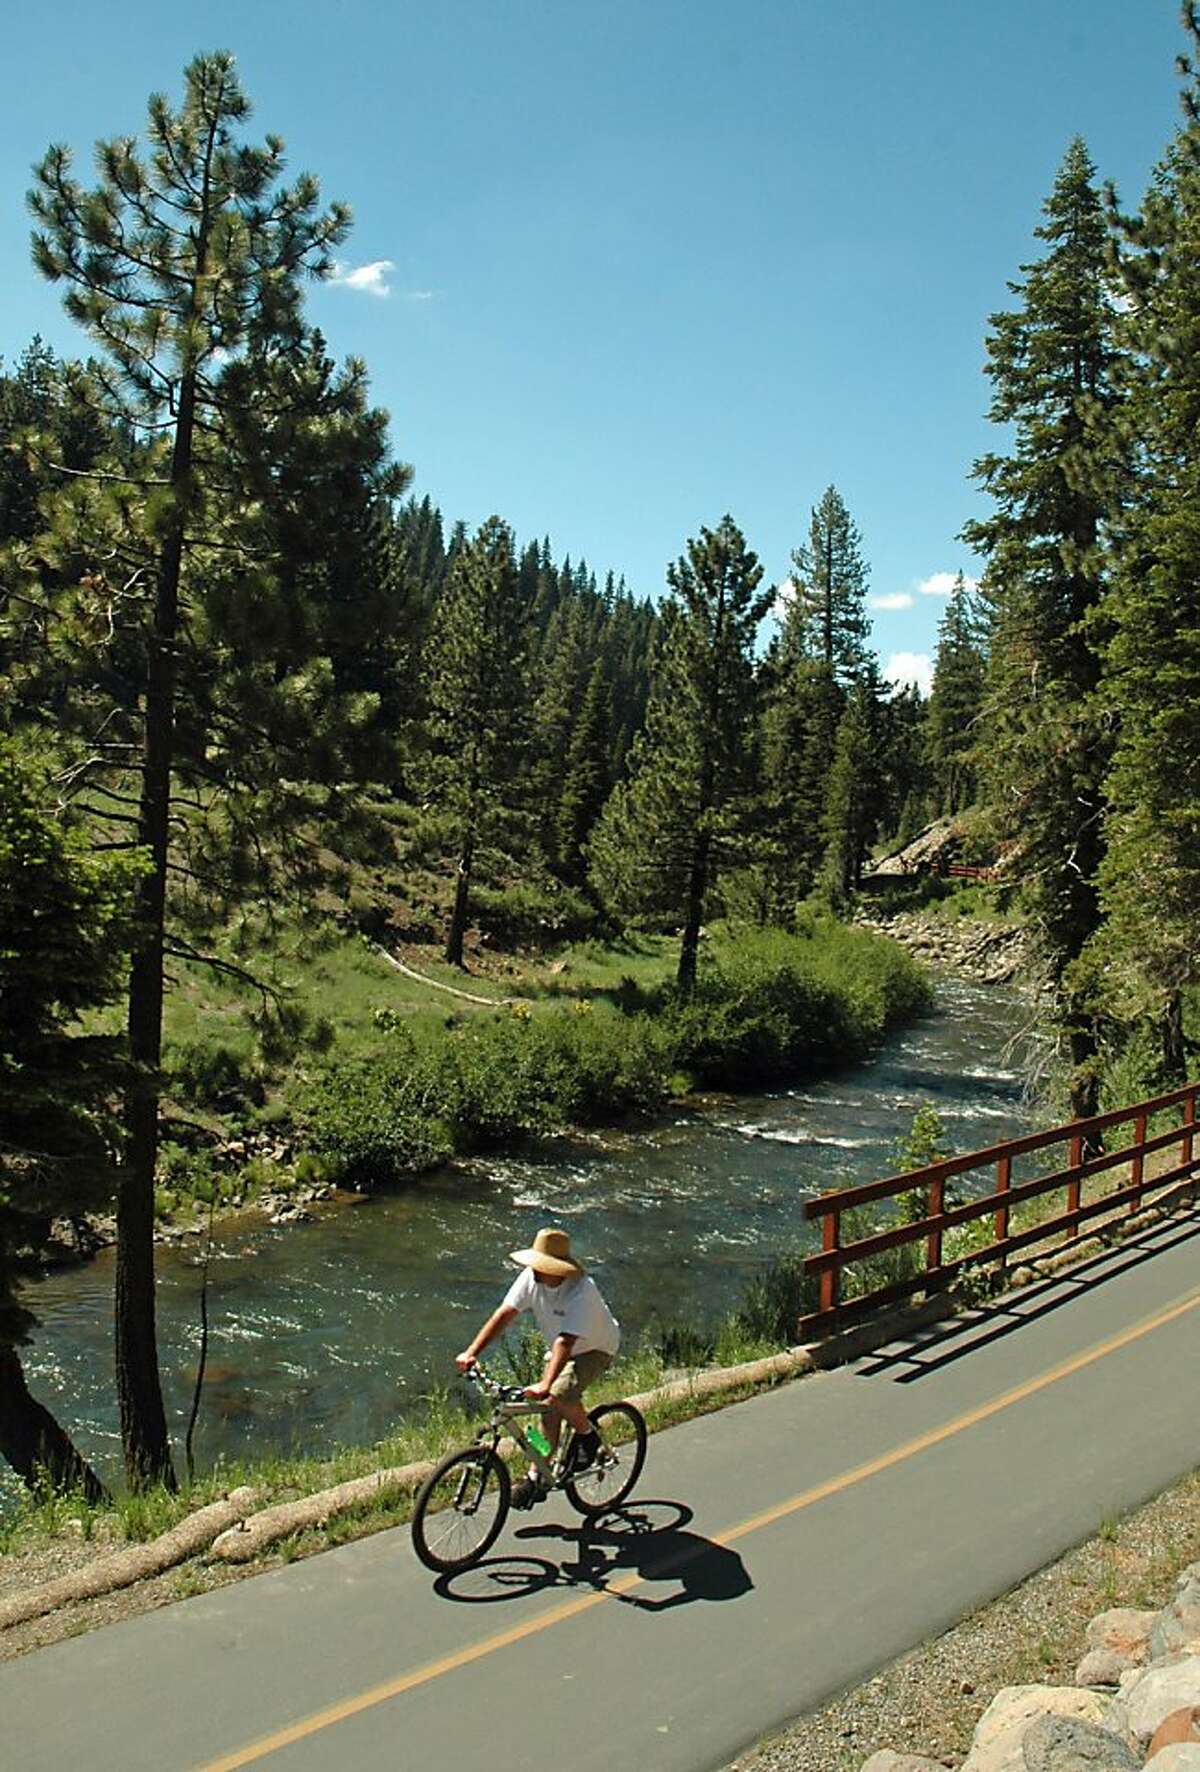 Lake Tahoe offers biking options for all types